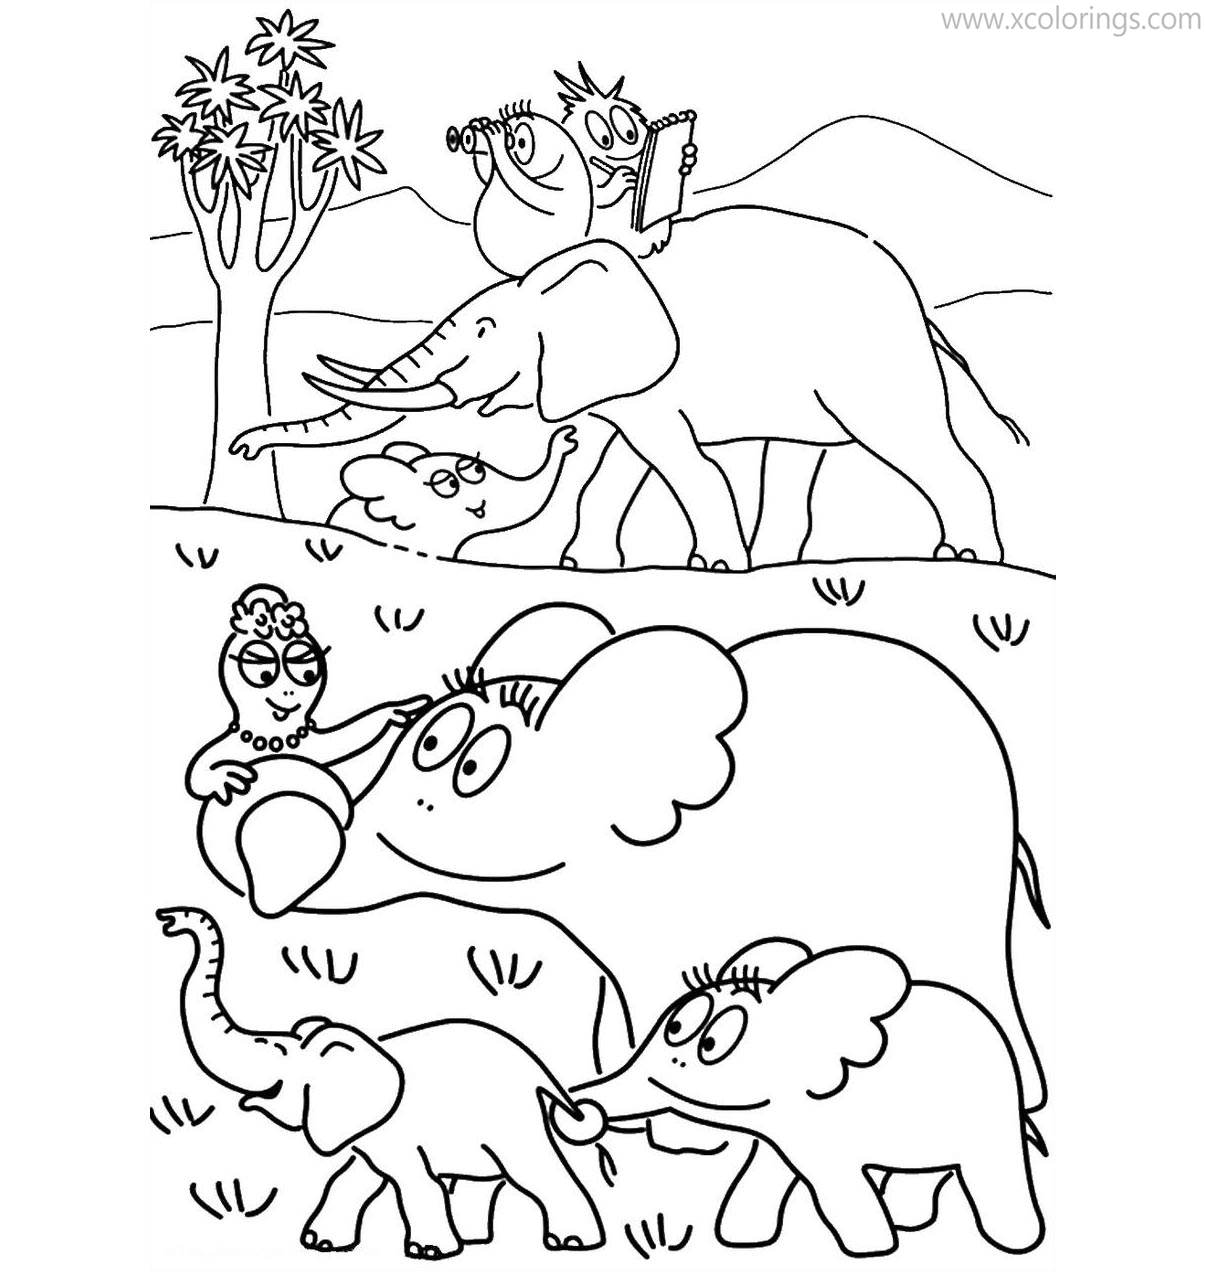 Free Barbapapa with Elephants Coloring Pages printable